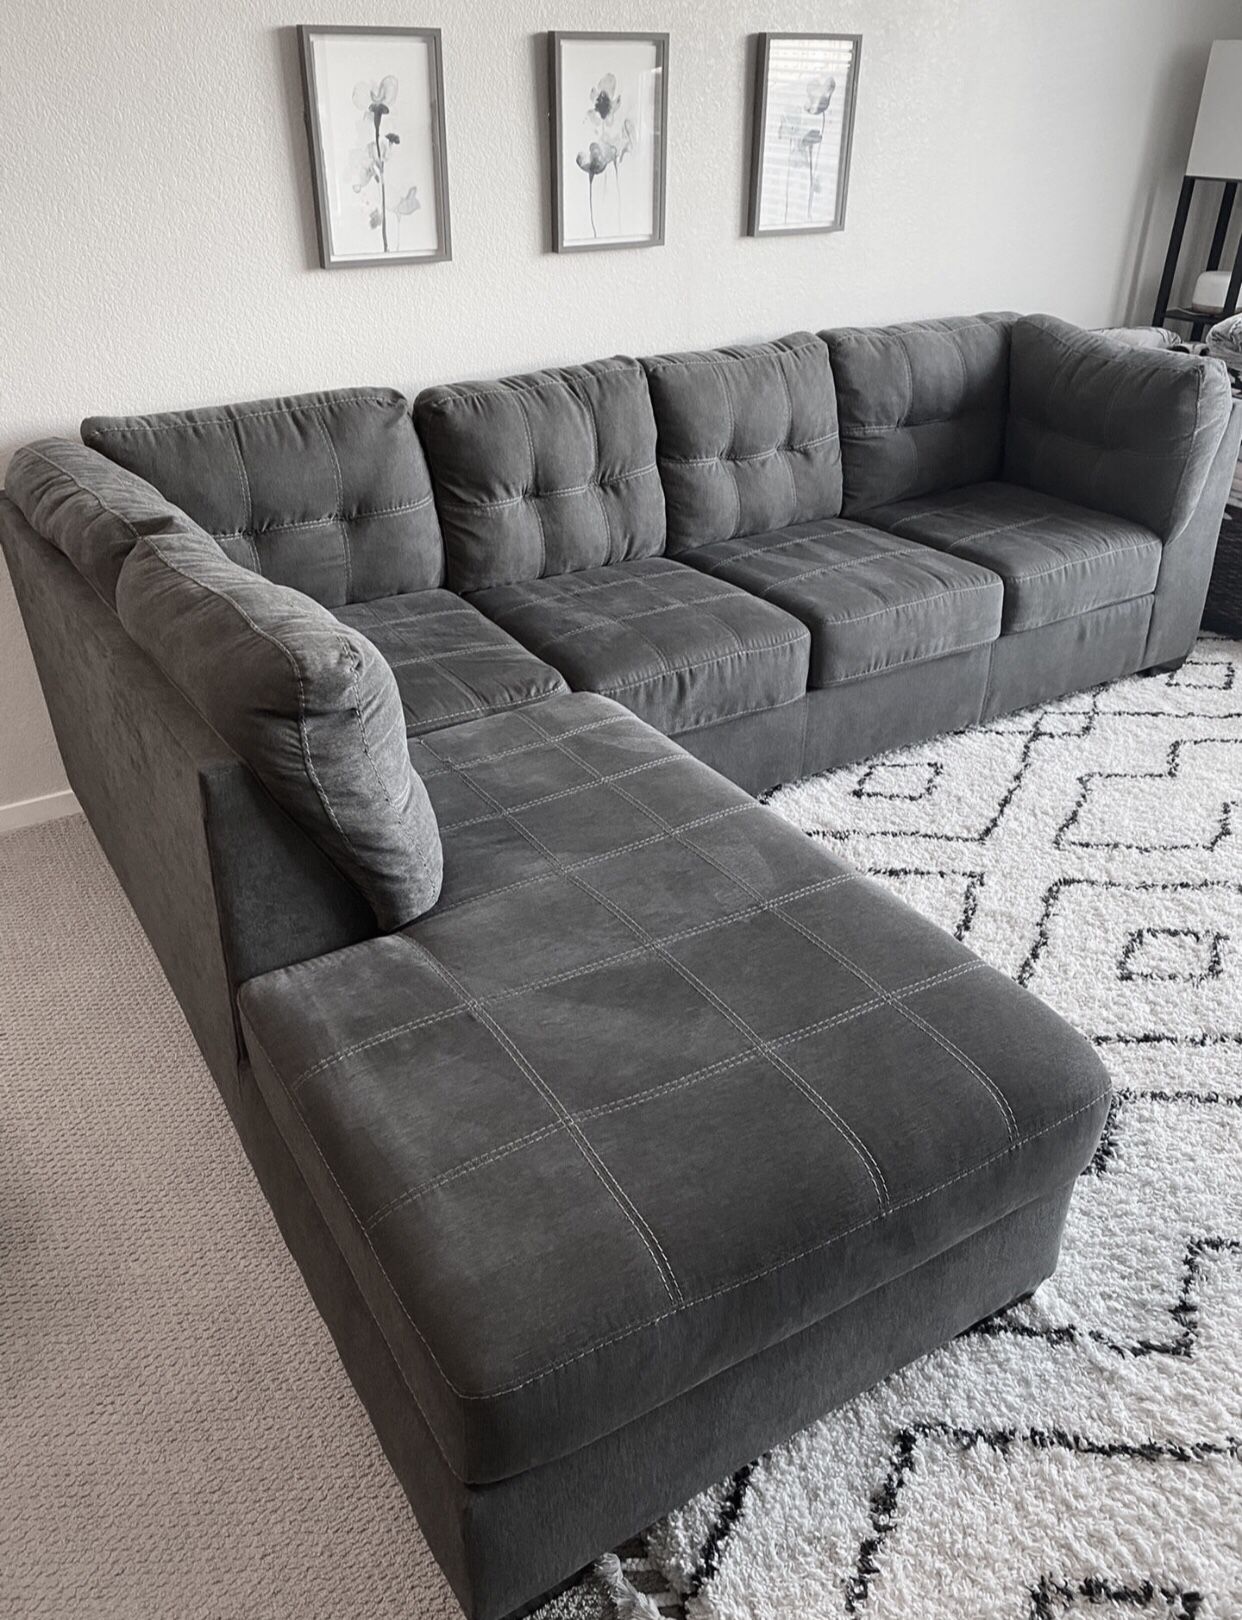 Like New - Ashleys Pullout Bed Modern Gray Sectional Sofa Couch w Chaise  🚚 Delivery Available